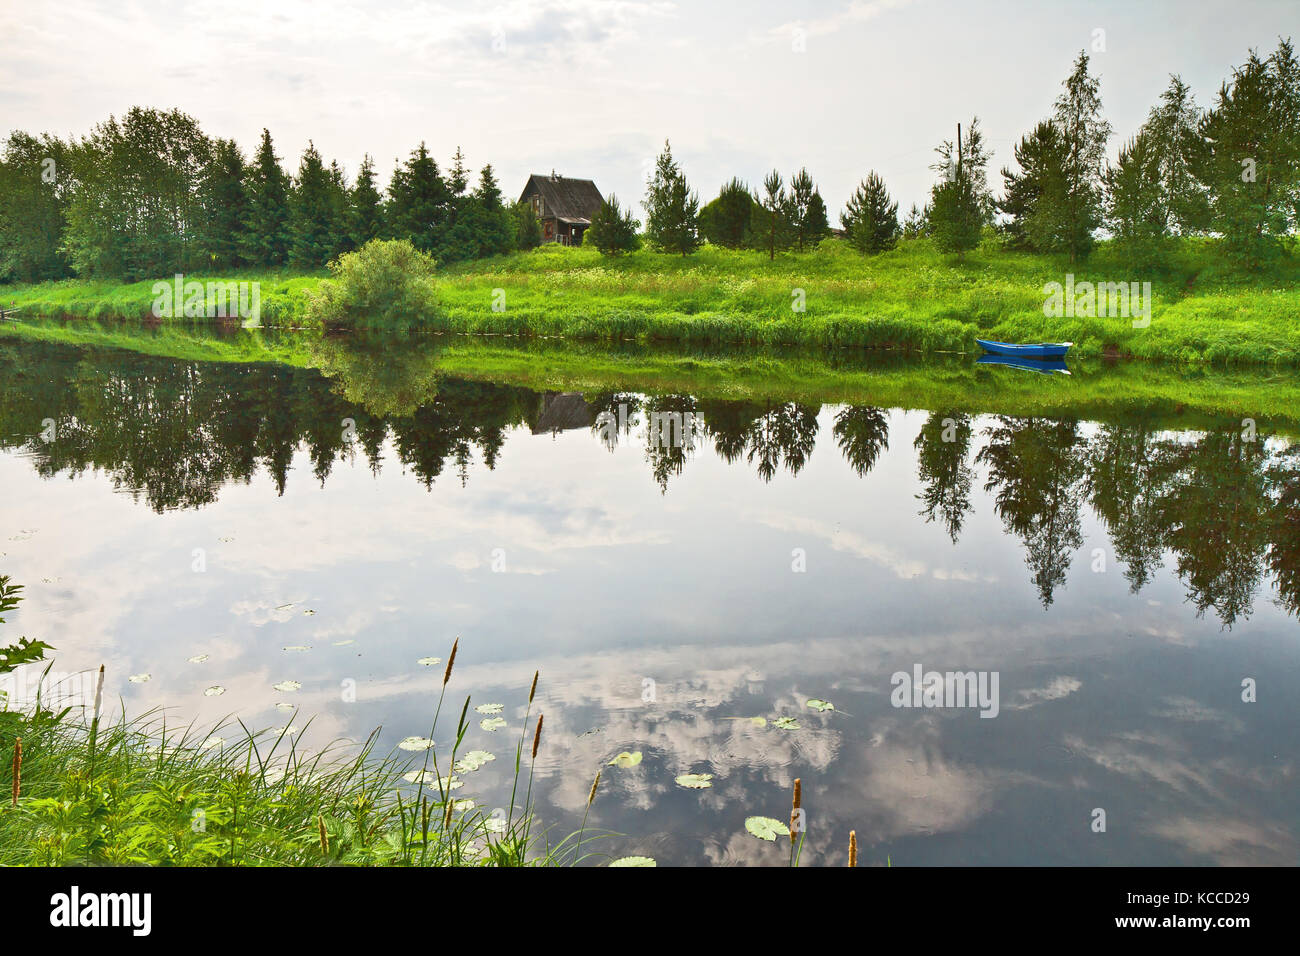 View on river with trees and bush on riverside reflecting in calm water. Karelia, Russia. Stock Photo